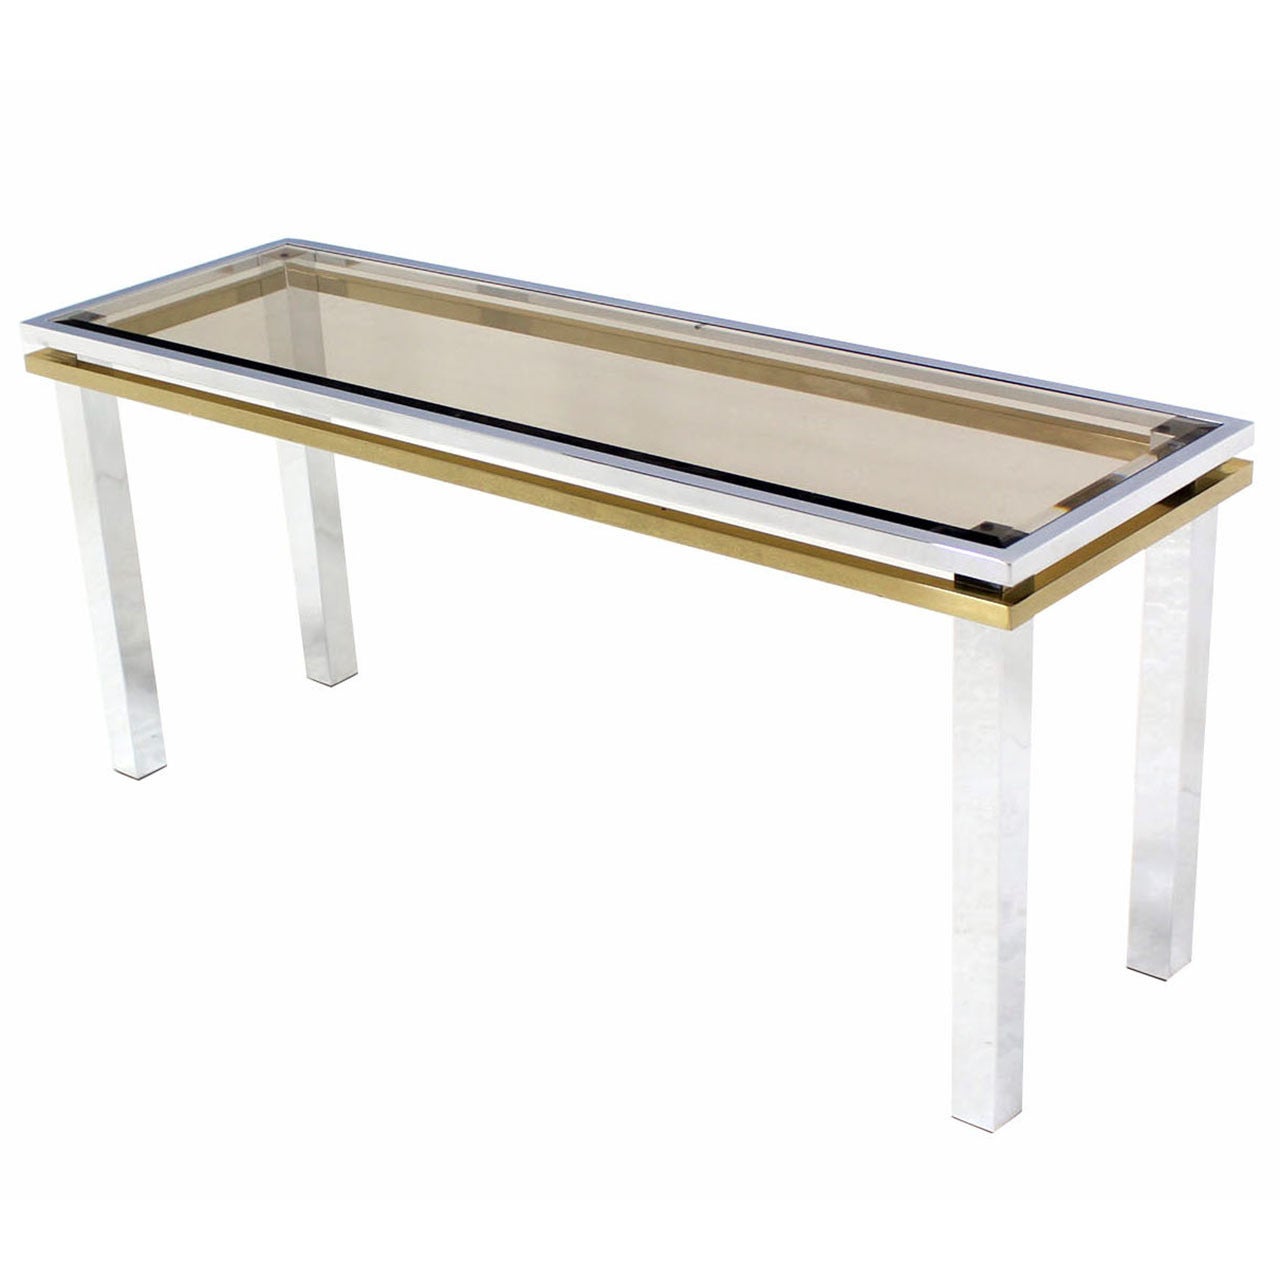 Chrome, Brass, and Glass Mid-Century Modern Console Table